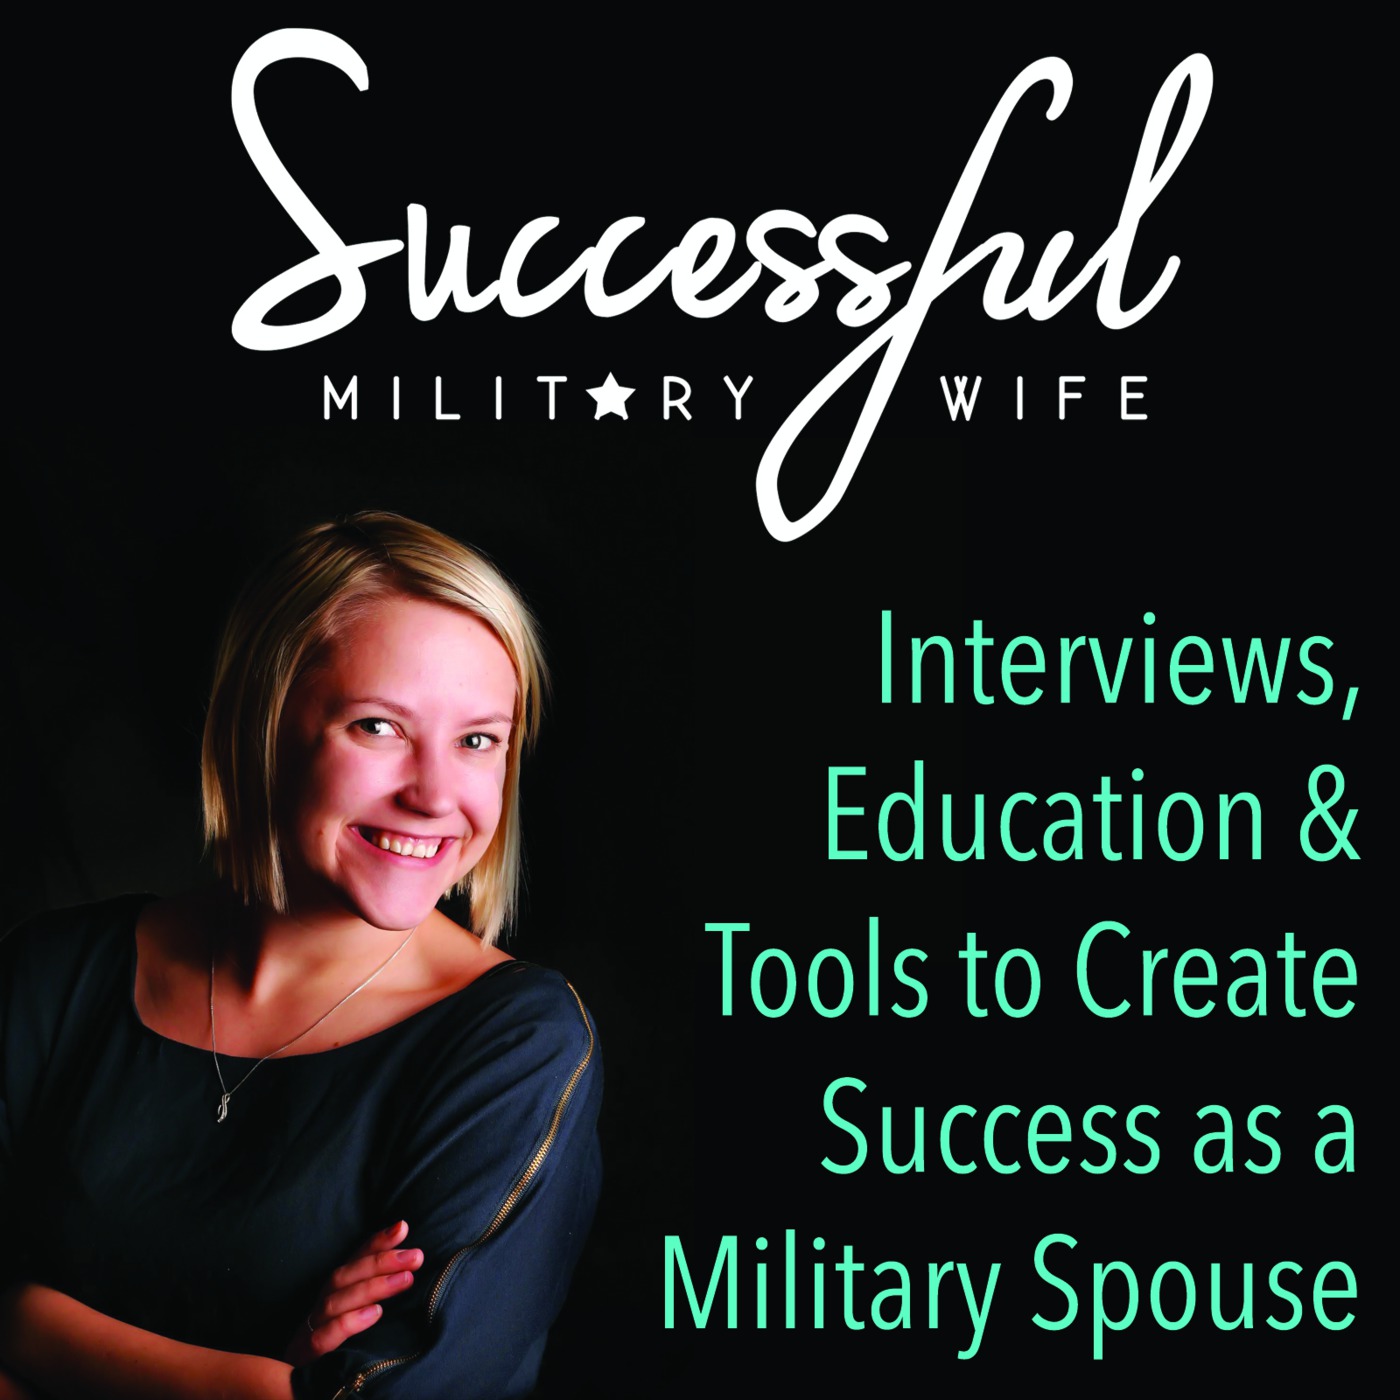 Successful Military Wife: How Law School turned into Financial Planning for an Army Wife